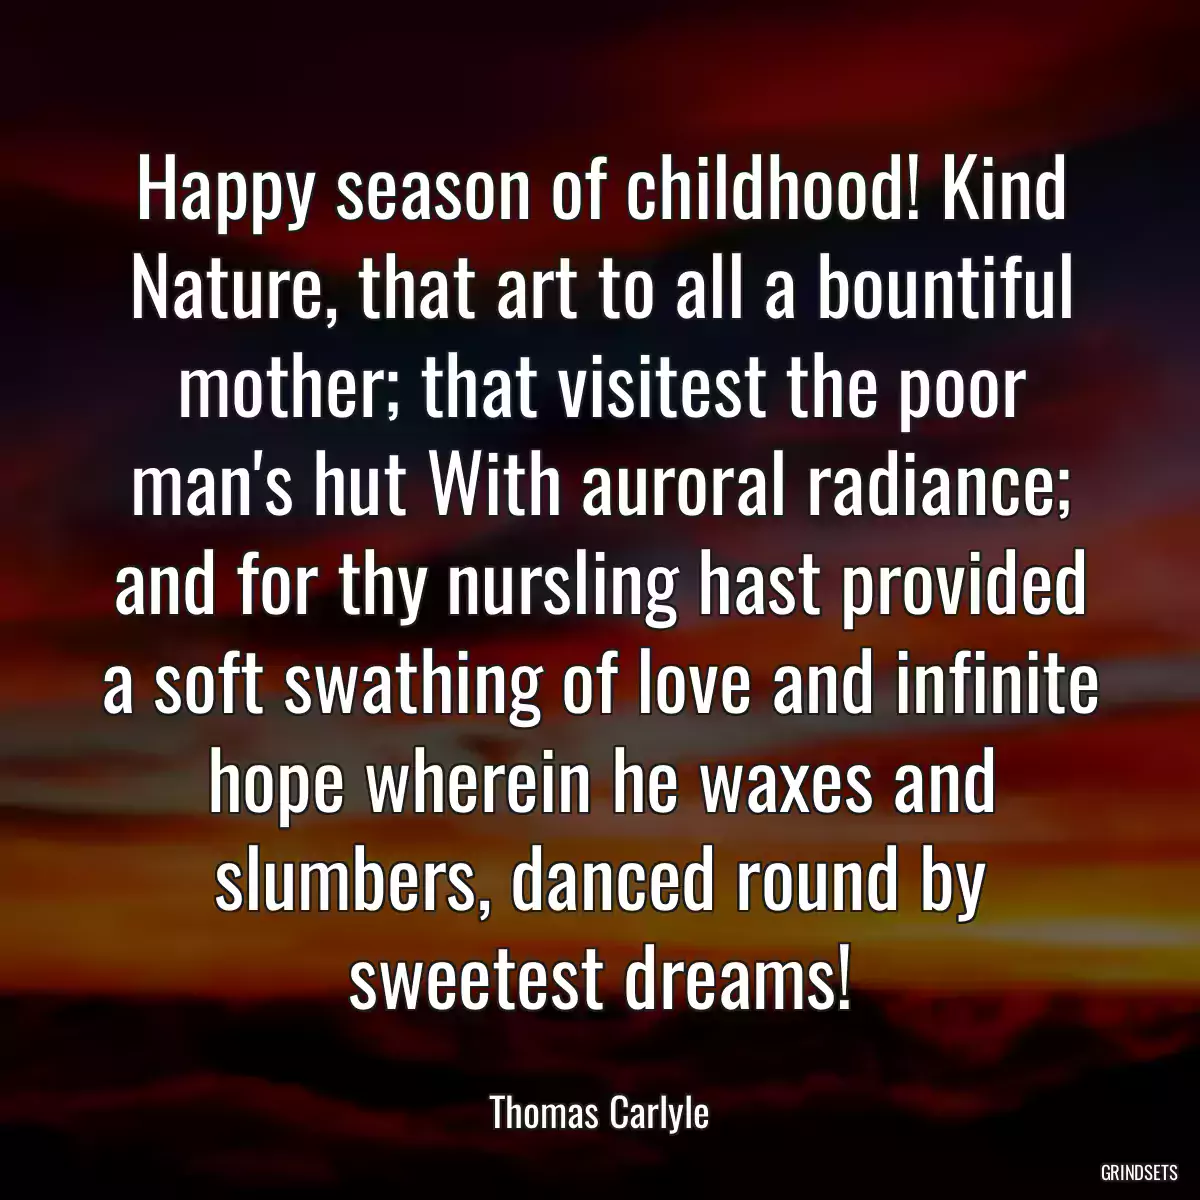 Happy season of childhood! Kind Nature, that art to all a bountiful mother; that visitest the poor man\'s hut With auroral radiance; and for thy nursling hast provided a soft swathing of love and infinite hope wherein he waxes and slumbers, danced round by sweetest dreams!